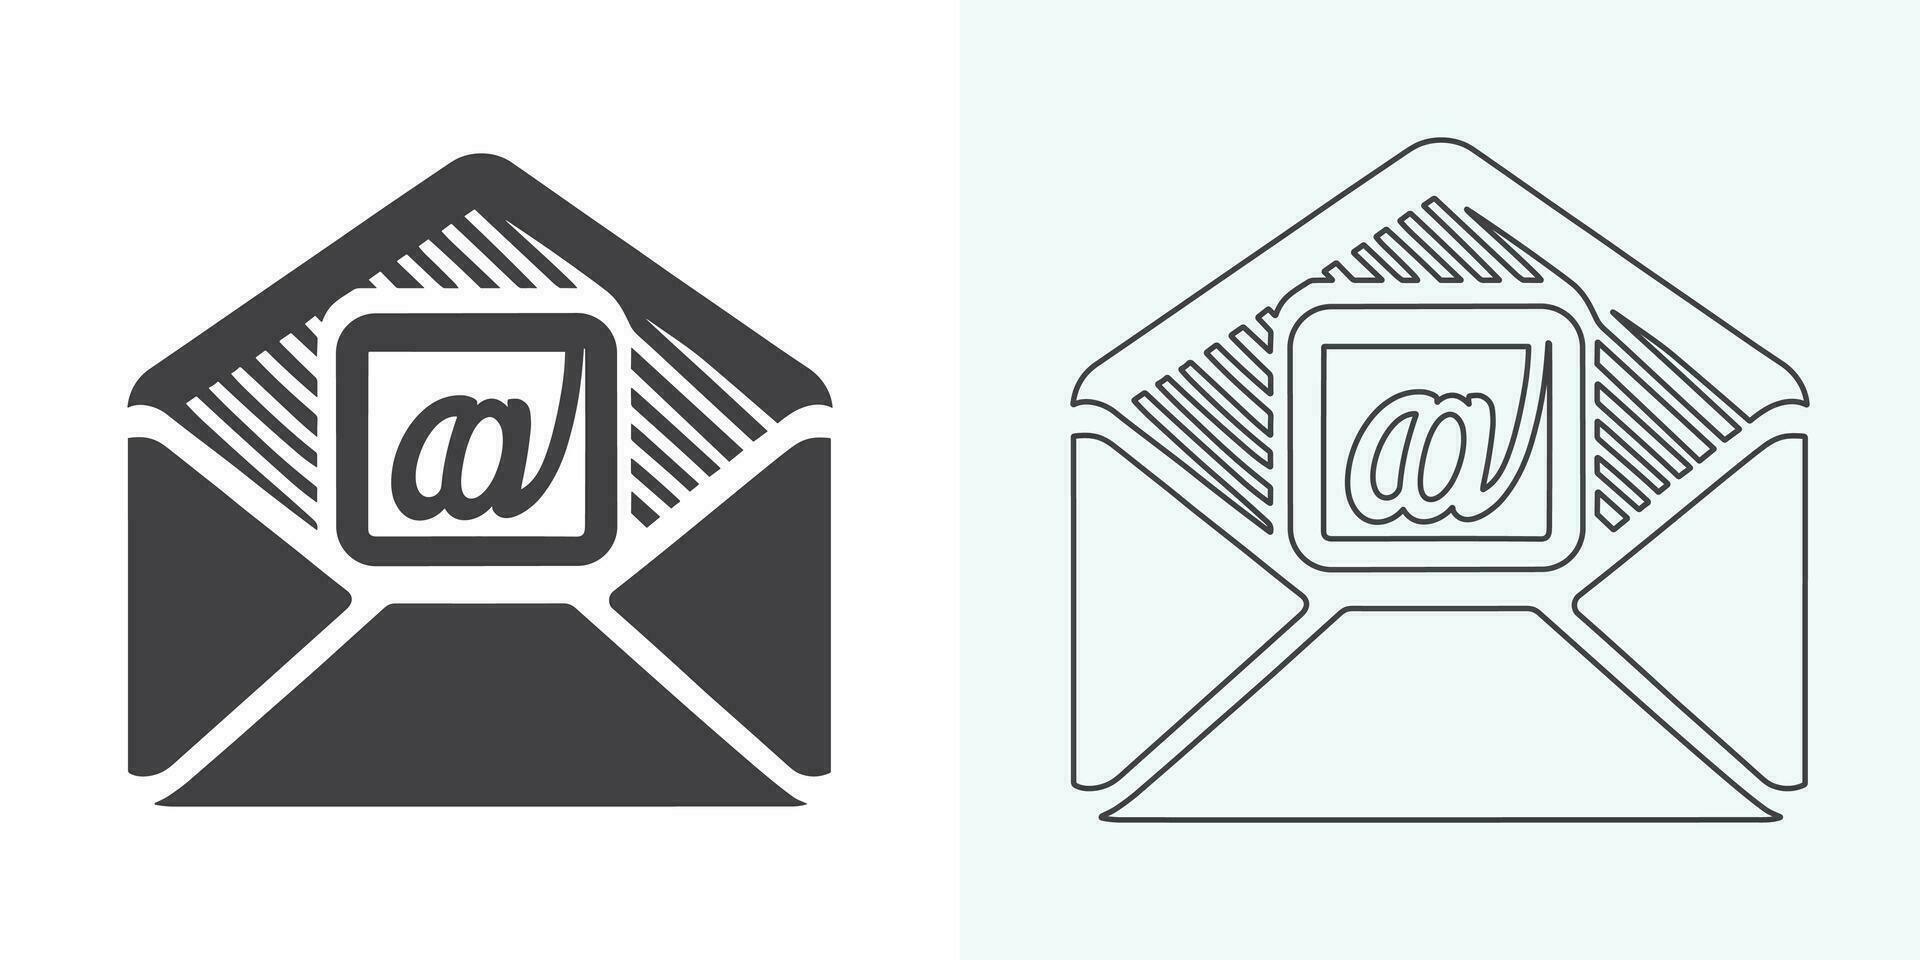 Email envelope icon vector illustration. Mail icon set. email icon vector. E-mail icon. Envelope illustration